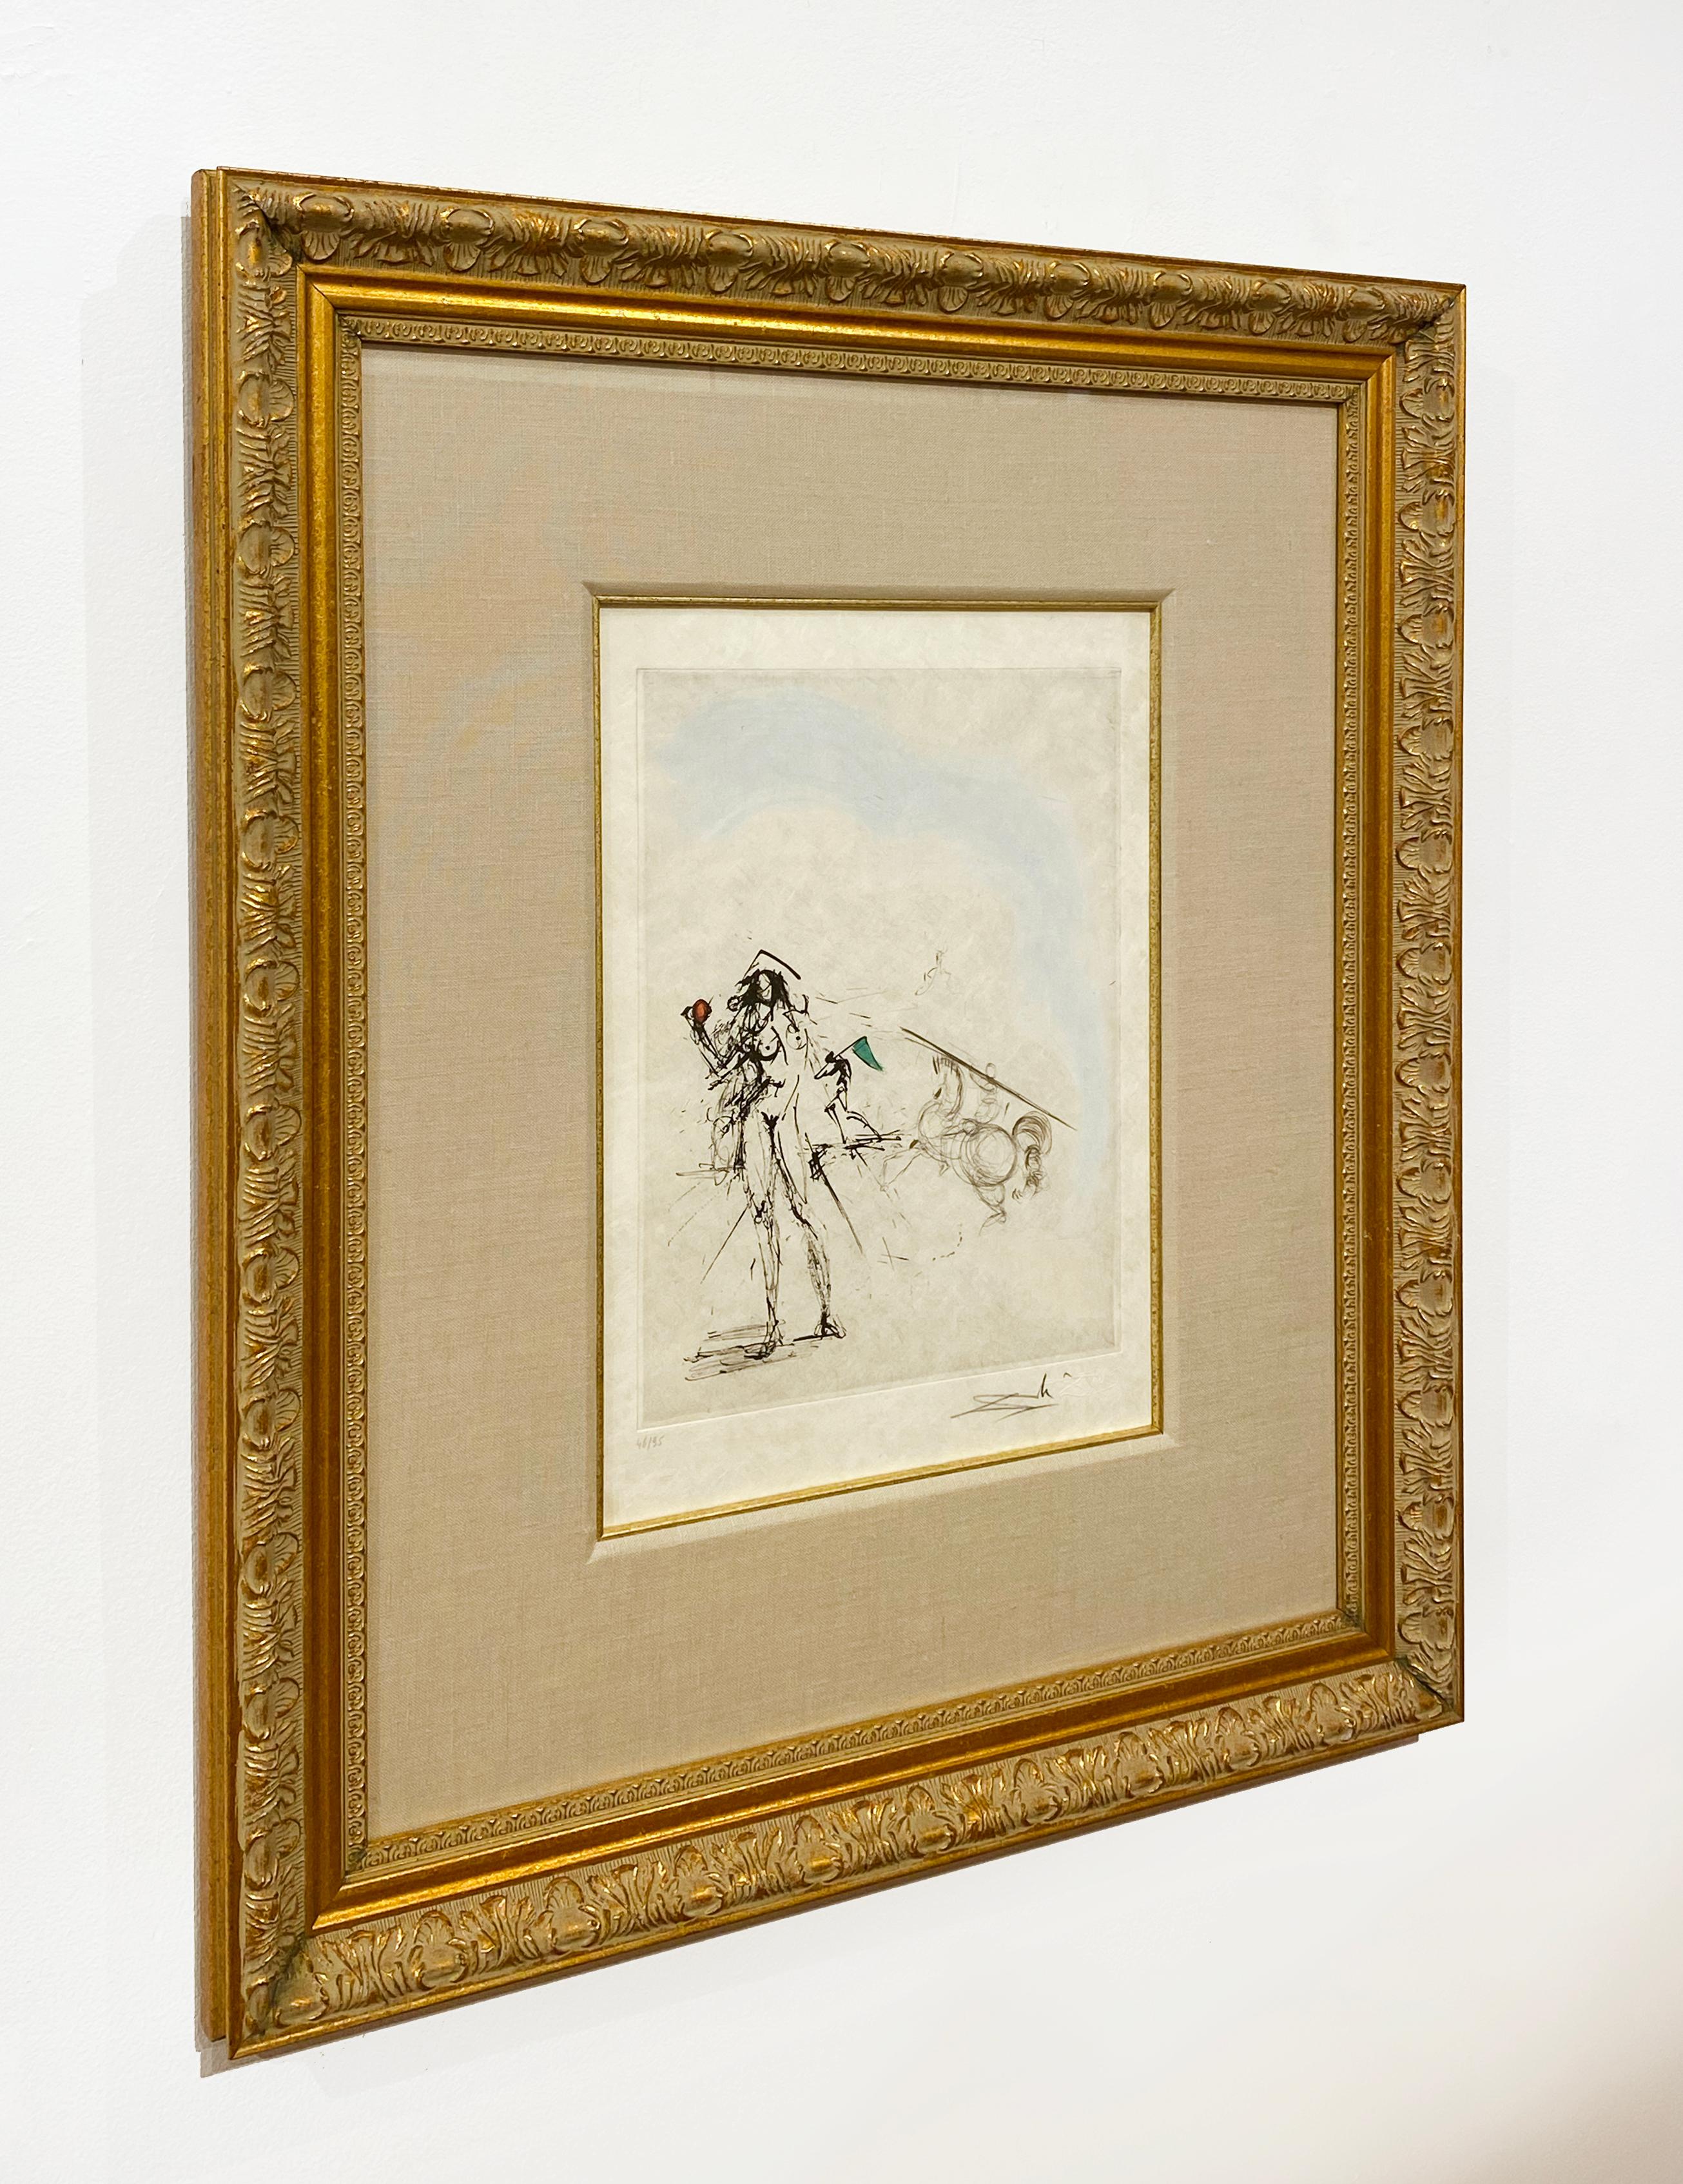 Artist:  Dali, Salvador
Title:  The Fisherman
Series:  Les Amours de Cassandre
Date:  1968
Medium:  drypoint with added color
Framed Dimensions:  27.5